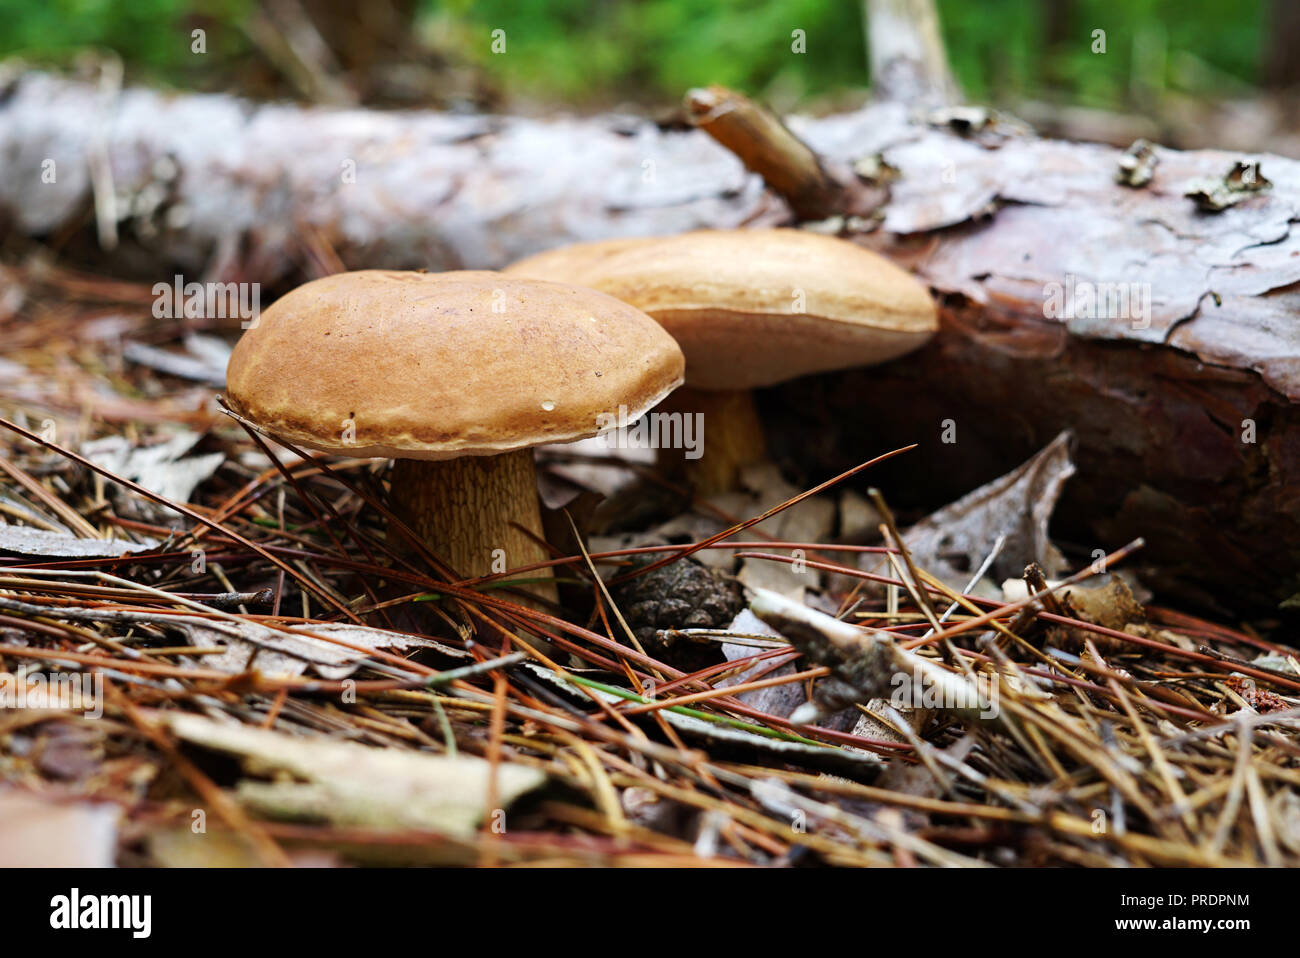 Two mushrooms with a brown hat grew next to the fallen log. Mushrooms are in the forest surrounded by foliage and spruce needles. Name of mushroom Lex Stock Photo